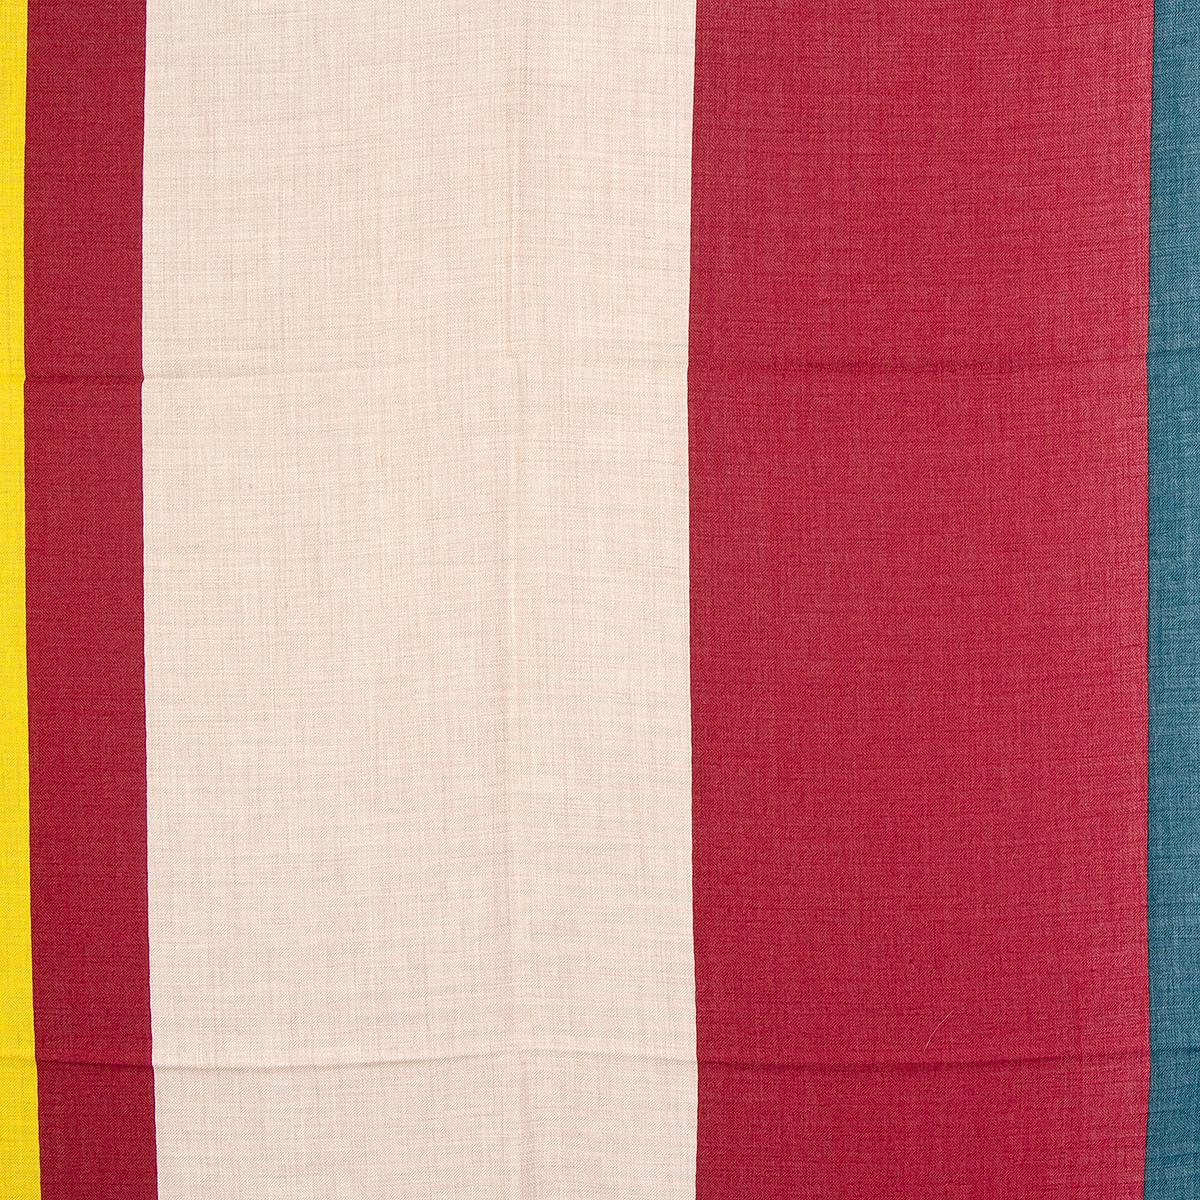 Hermes 'Encadre Club' shawl in oatmeal, dark red and teal cashmere (70%) and silk (30%) with stripes in yellow, dark red and dark grey. Brand new. No Box.

Width 140cm (54.6in)
Height 140cm (54.6in)